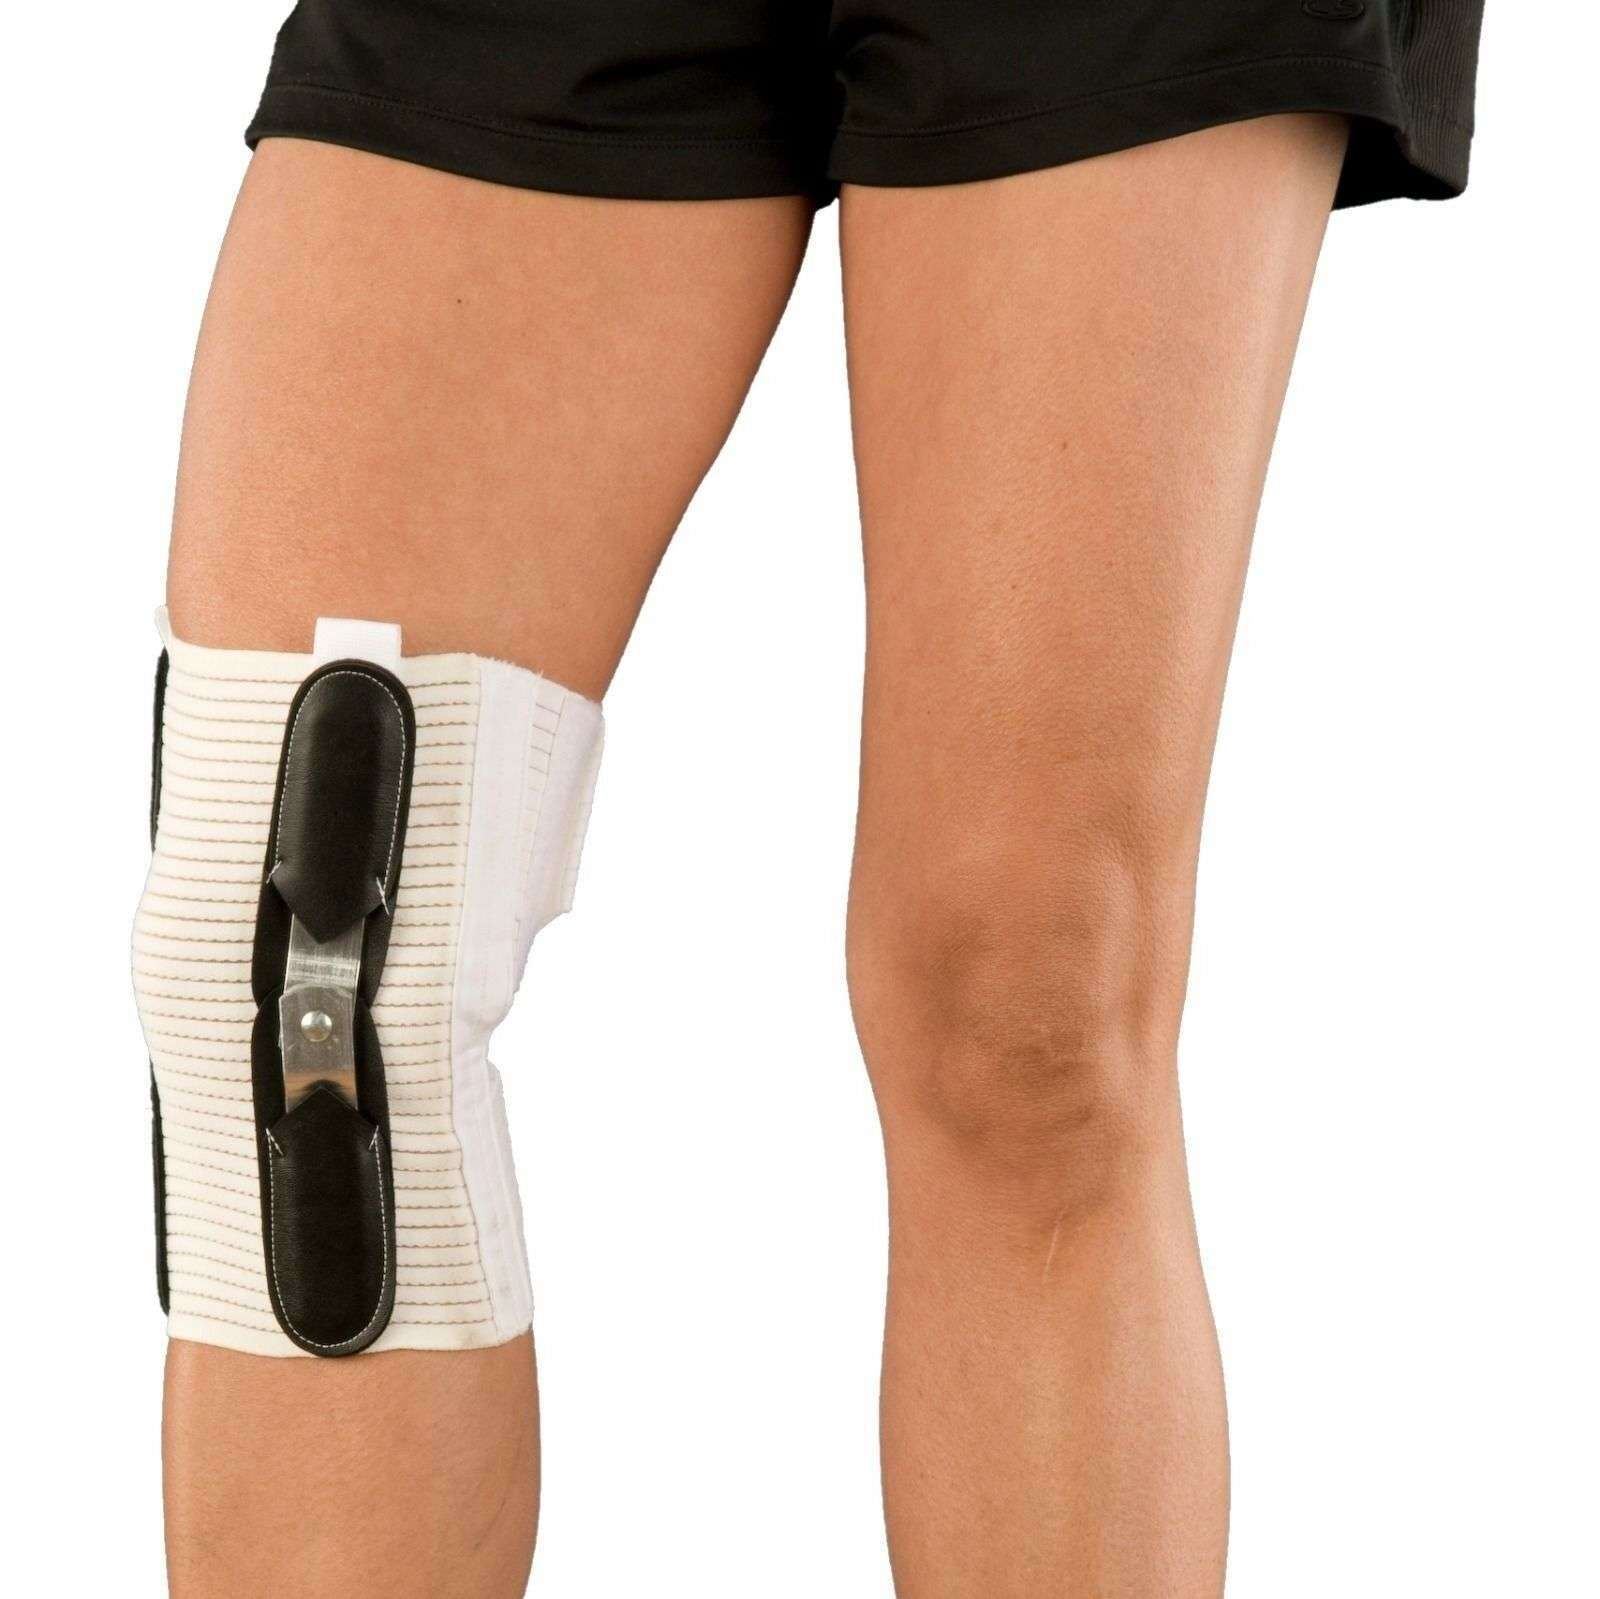 AT Surgical Hinged Knee Brace with Spirals for ...